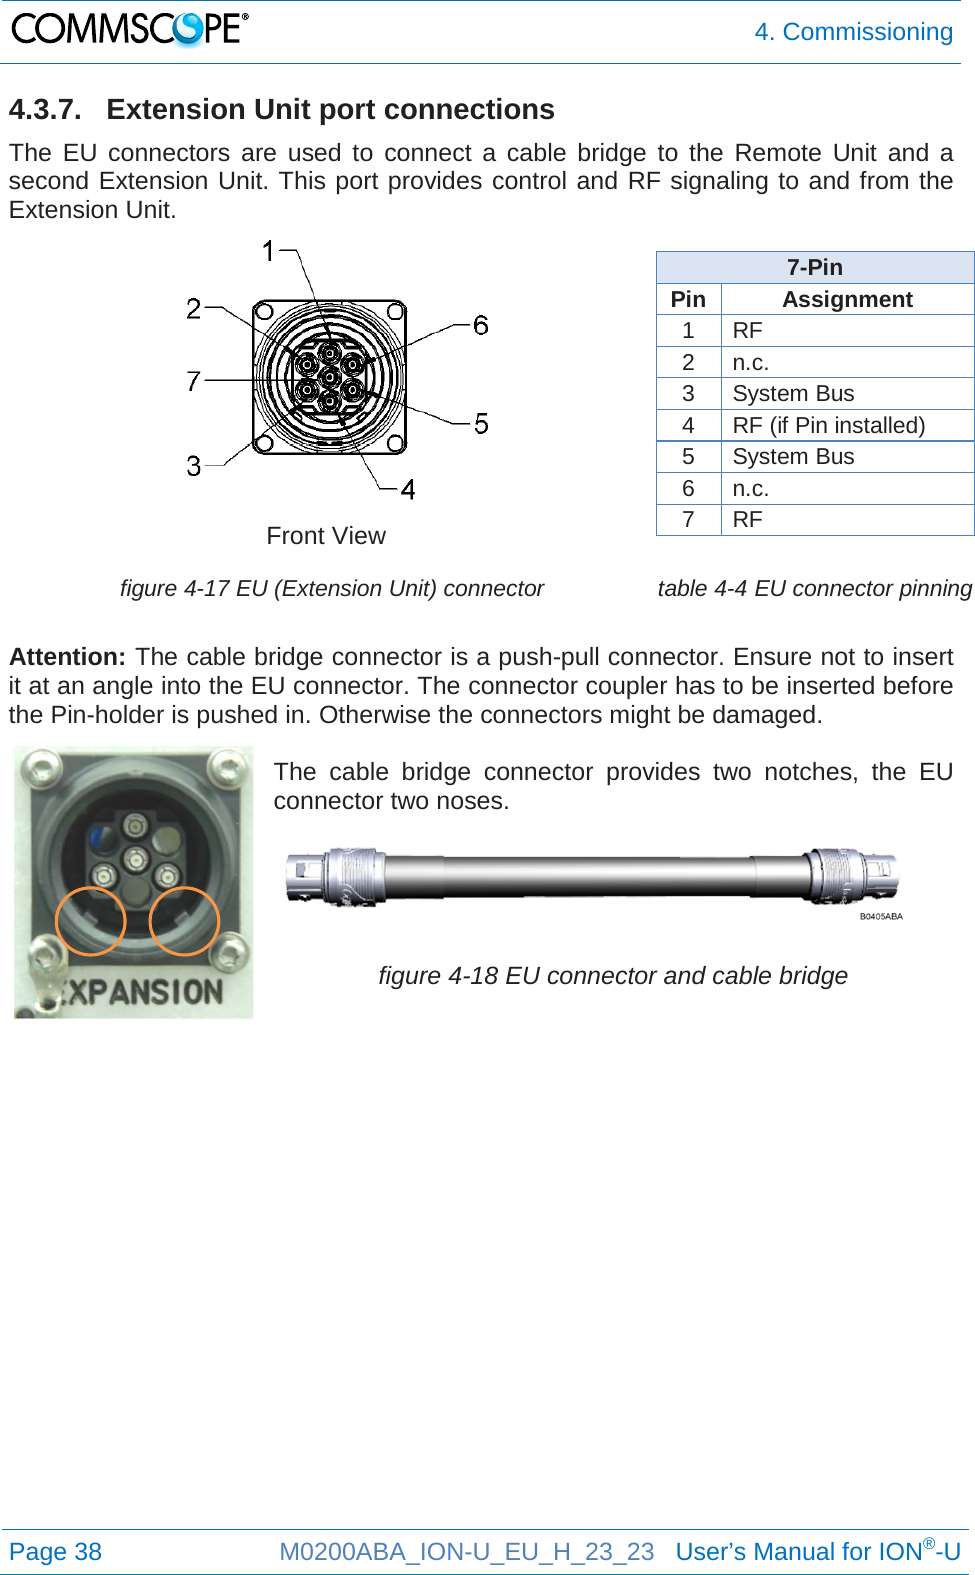  4. Commissioning  Page 38 M0200ABA_ION-U_EU_H_23_23   User’s Manual for ION®-U  4.3.7.  Extension Unit port connections The EU connectors  are used to connect a cable bridge to  the Remote Unit and a second Extension Unit. This port provides control and RF signaling to and from the Extension Unit.  Front View 7-Pin  Pin Assignment 1 RF 2 n.c. 3 System Bus 4 RF (if Pin installed) 5 System Bus 6 n.c. 7 RF  figure 4-17 EU (Extension Unit) connector table 4-4 EU connector pinning  Attention: The cable bridge connector is a push-pull connector. Ensure not to insert it at an angle into the EU connector. The connector coupler has to be inserted before the Pin-holder is pushed in. Otherwise the connectors might be damaged.  The cable bridge connector provides two notches, the EU connector two noses.    figure 4-18 EU connector and cable bridge     